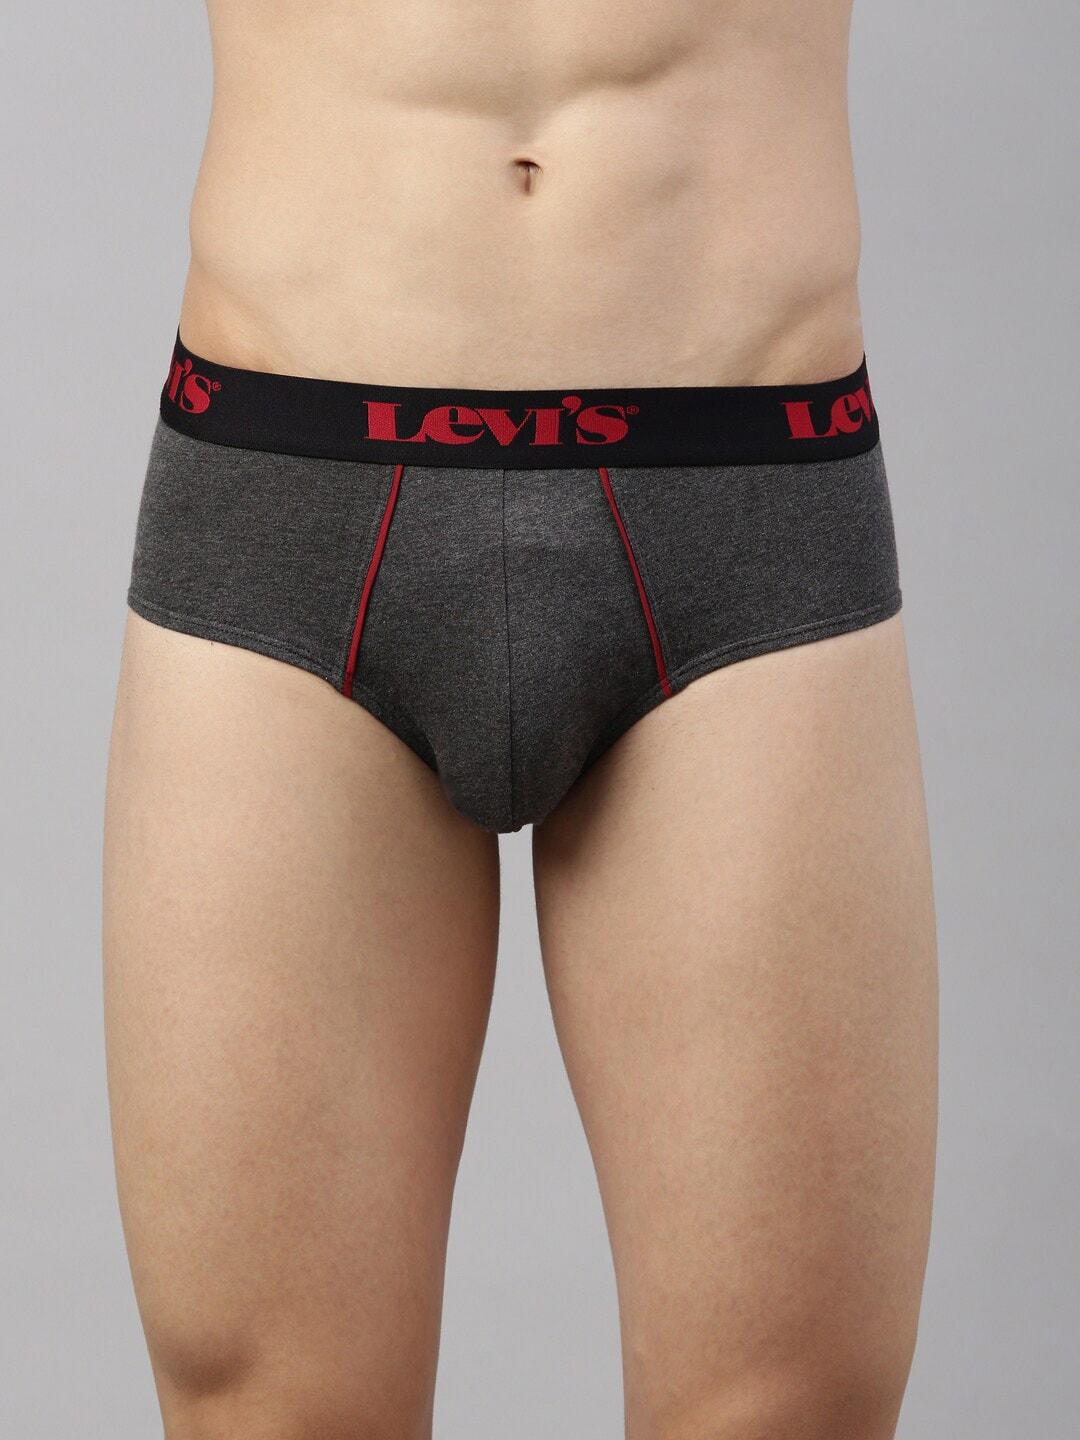 levis-men-smartskin-technology-cotton-ultra-briefs-with-tag-free-comfort-065